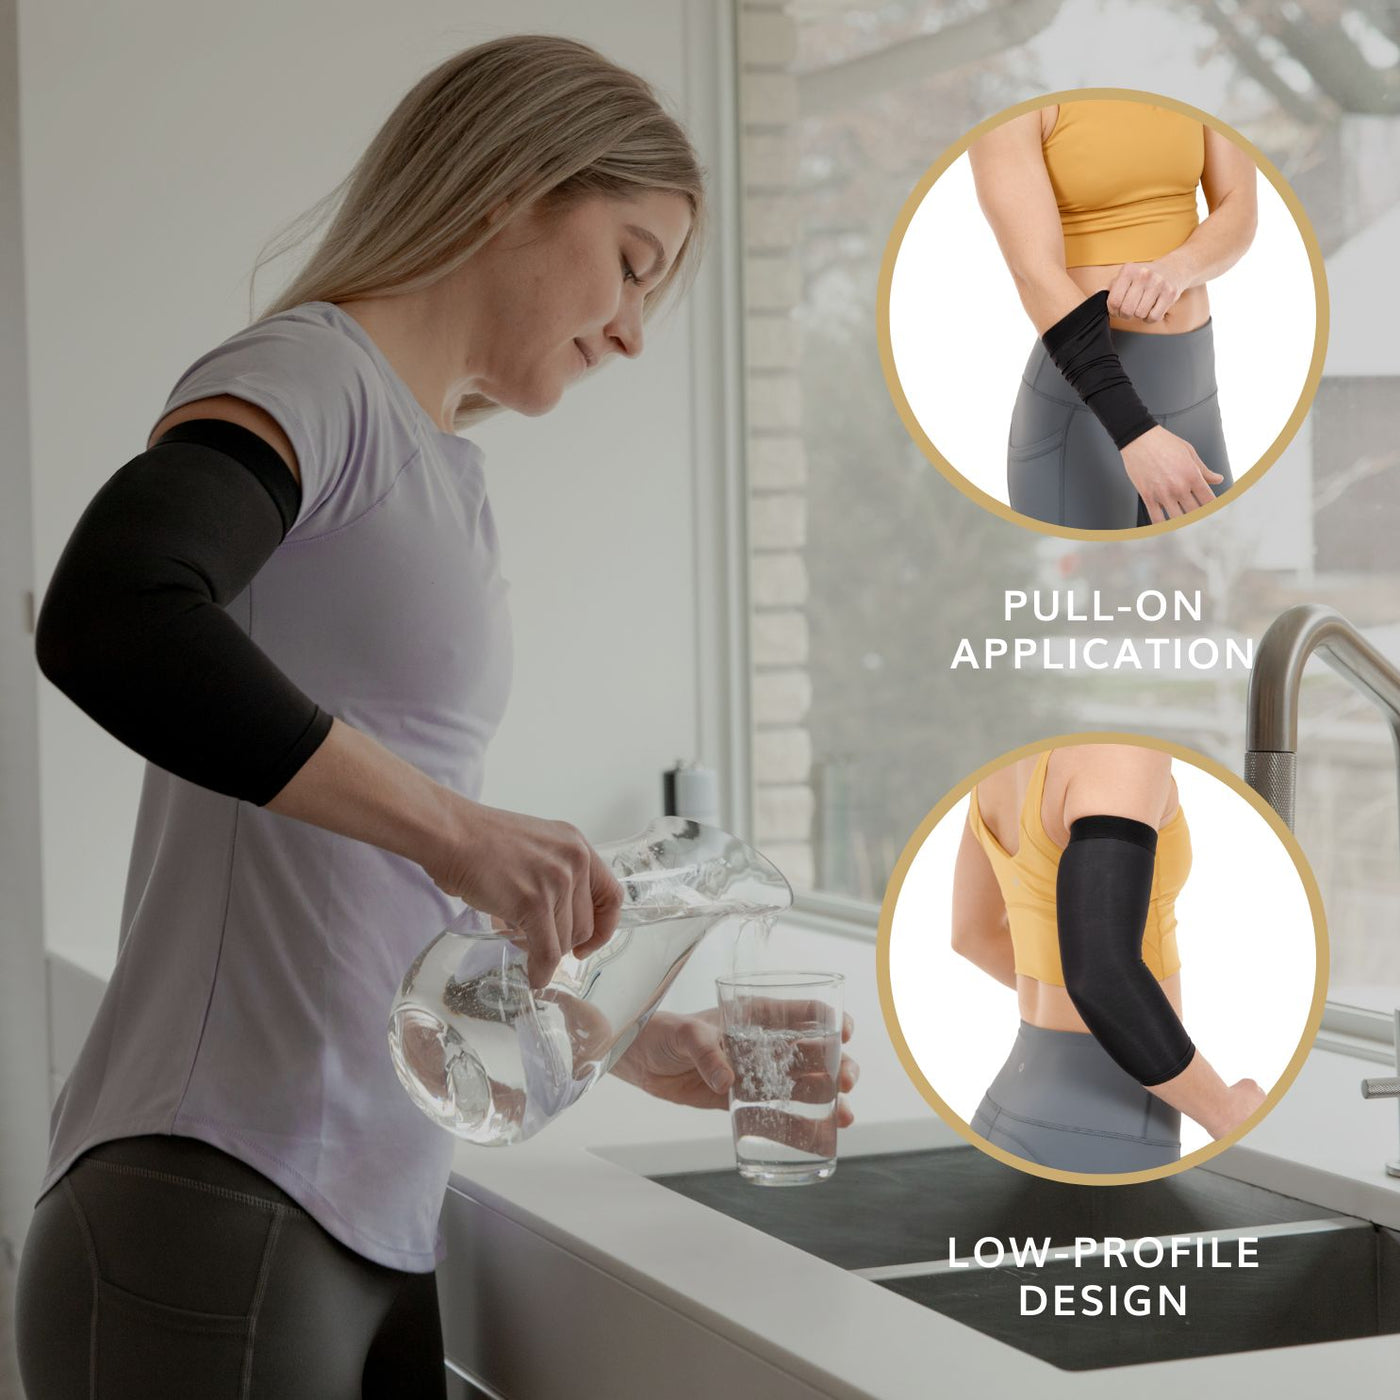 our arm compression sleeve for pain is breathable, quick drying, and low profile making it the best tennis elbow tendonitis treatment